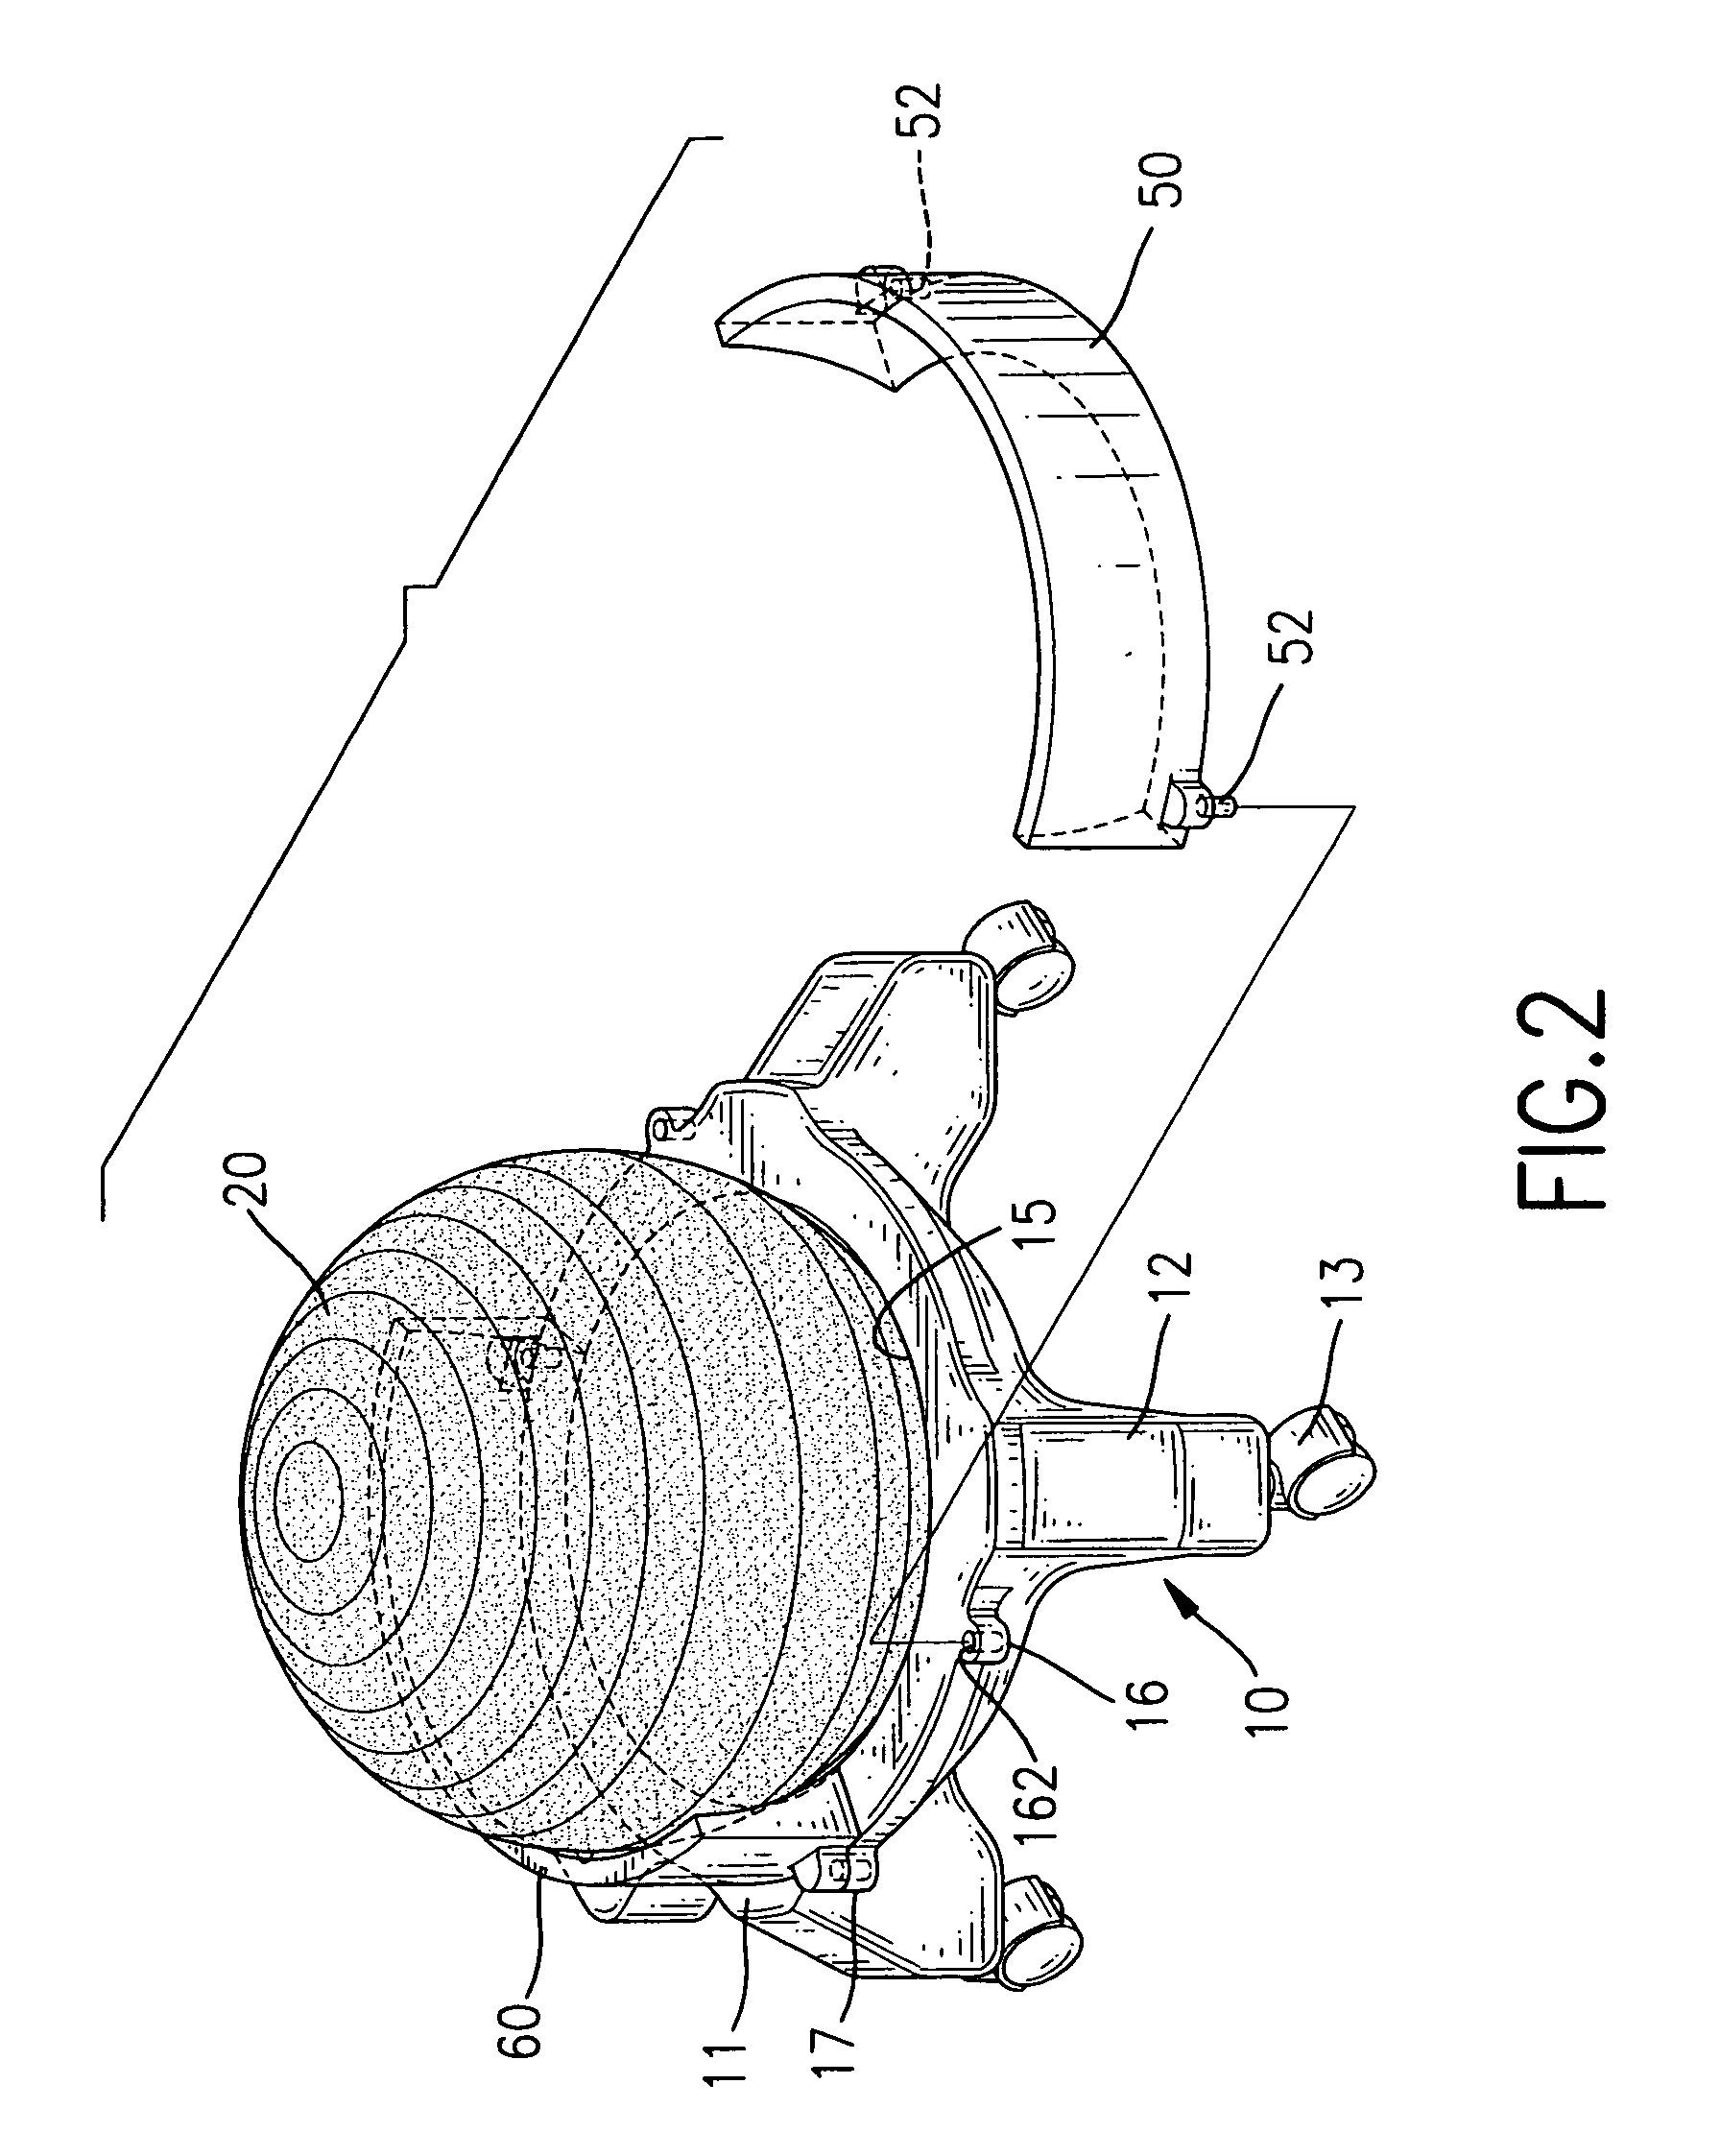 Ball chair with a retaining device